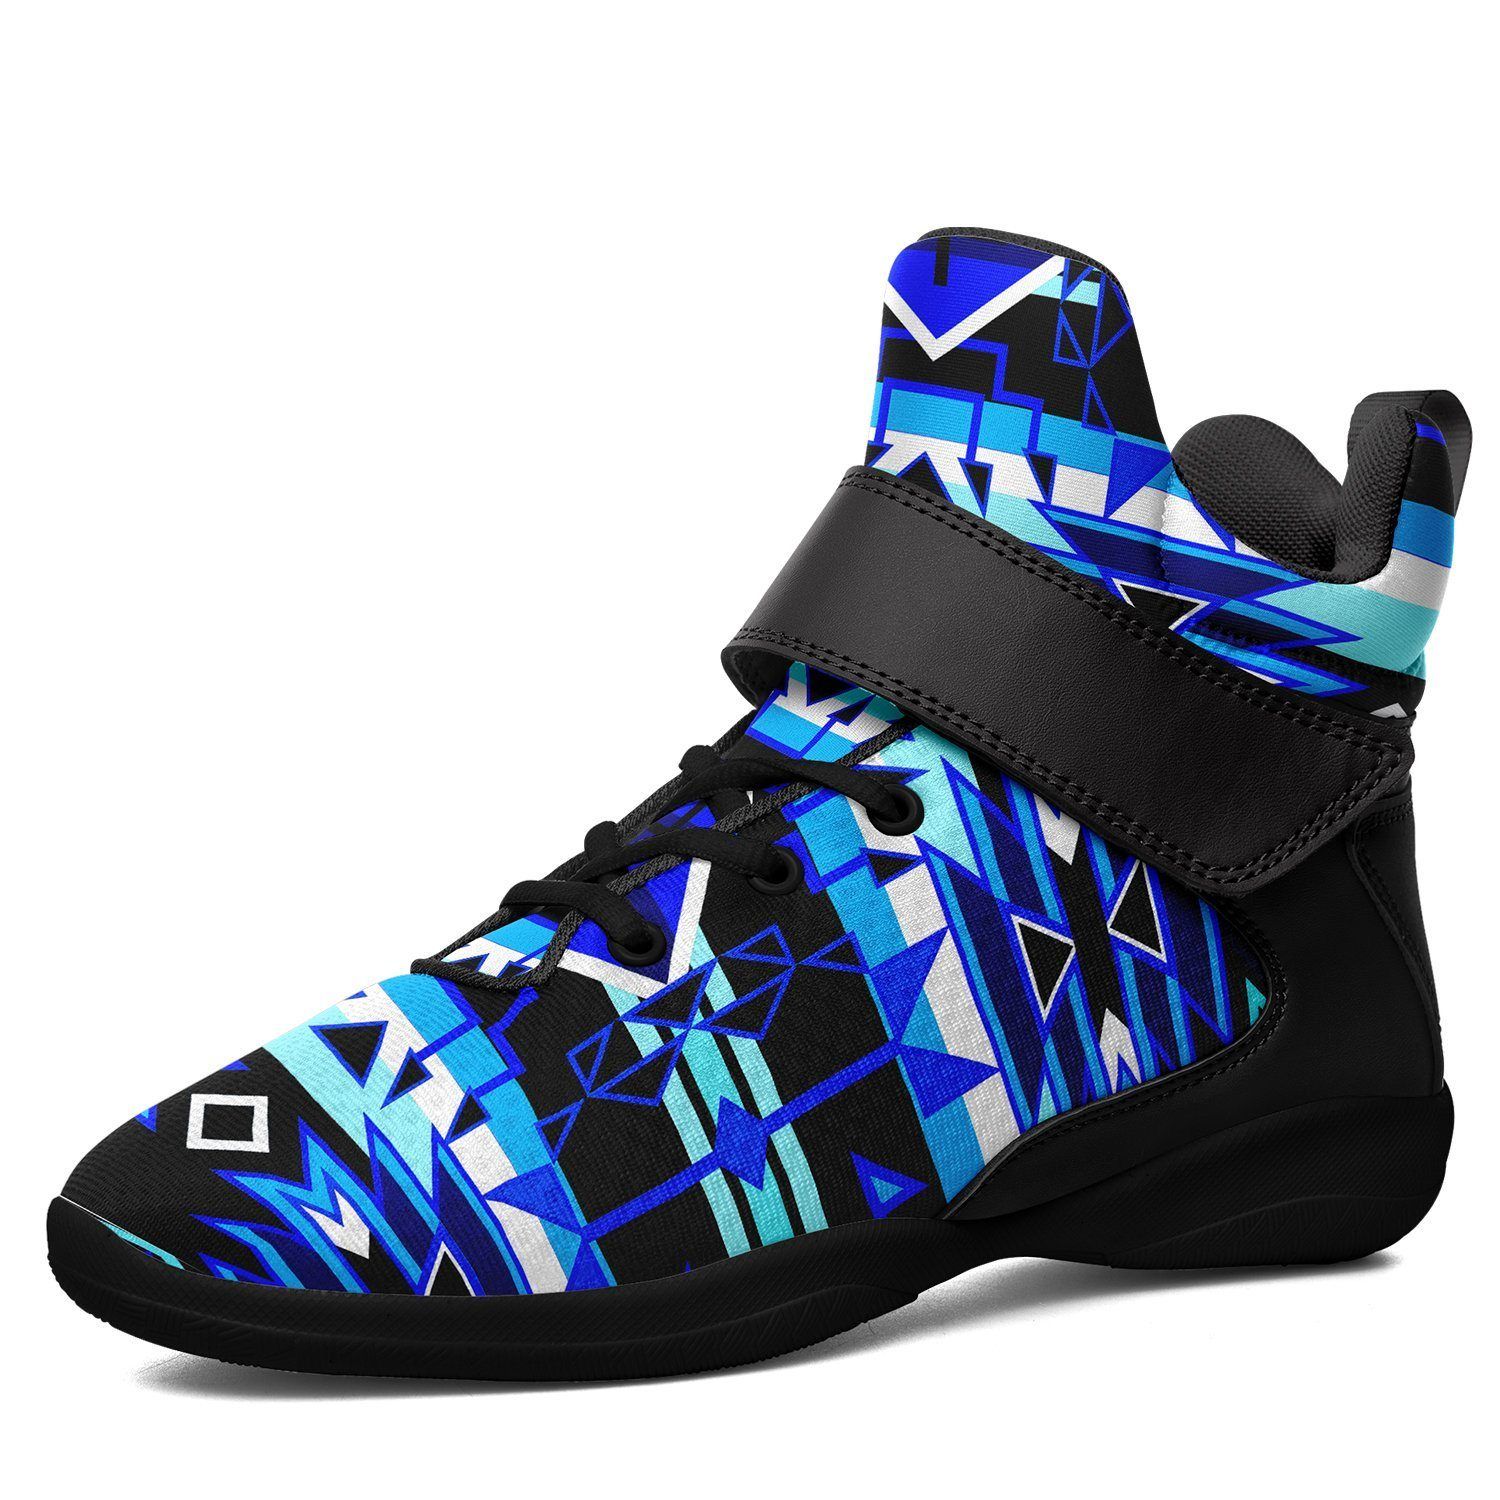 Force of Nature Winter Night Ipottaa Basketball / Sport High Top Shoes - Black Sole 49 Dzine US Men 7 / EUR 40 Black Sole with Black Strap 